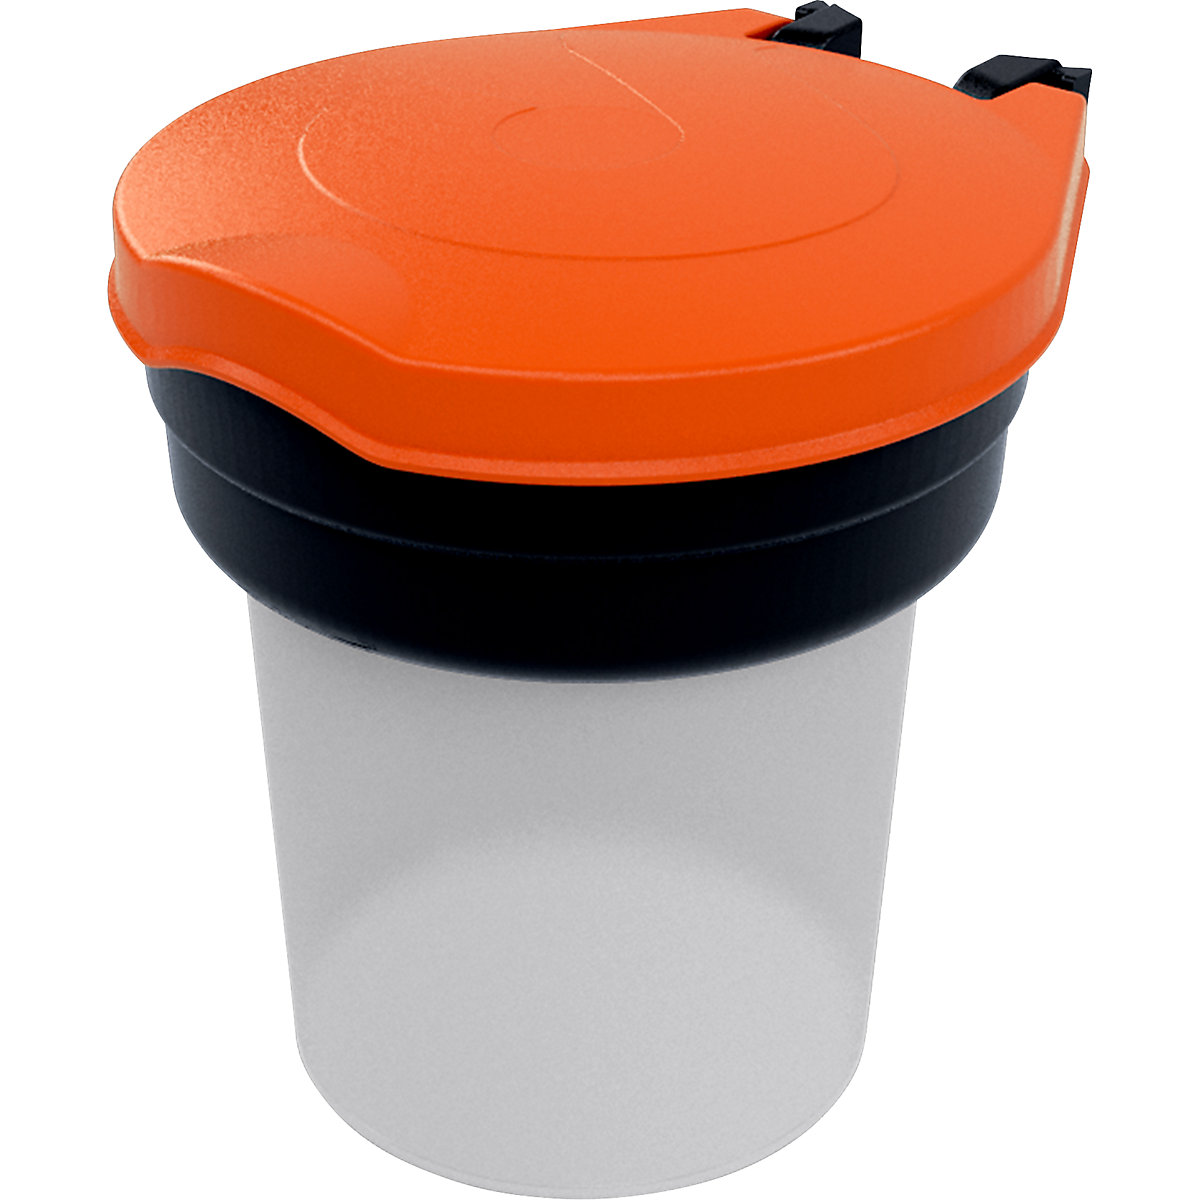 Safety container – Skipper